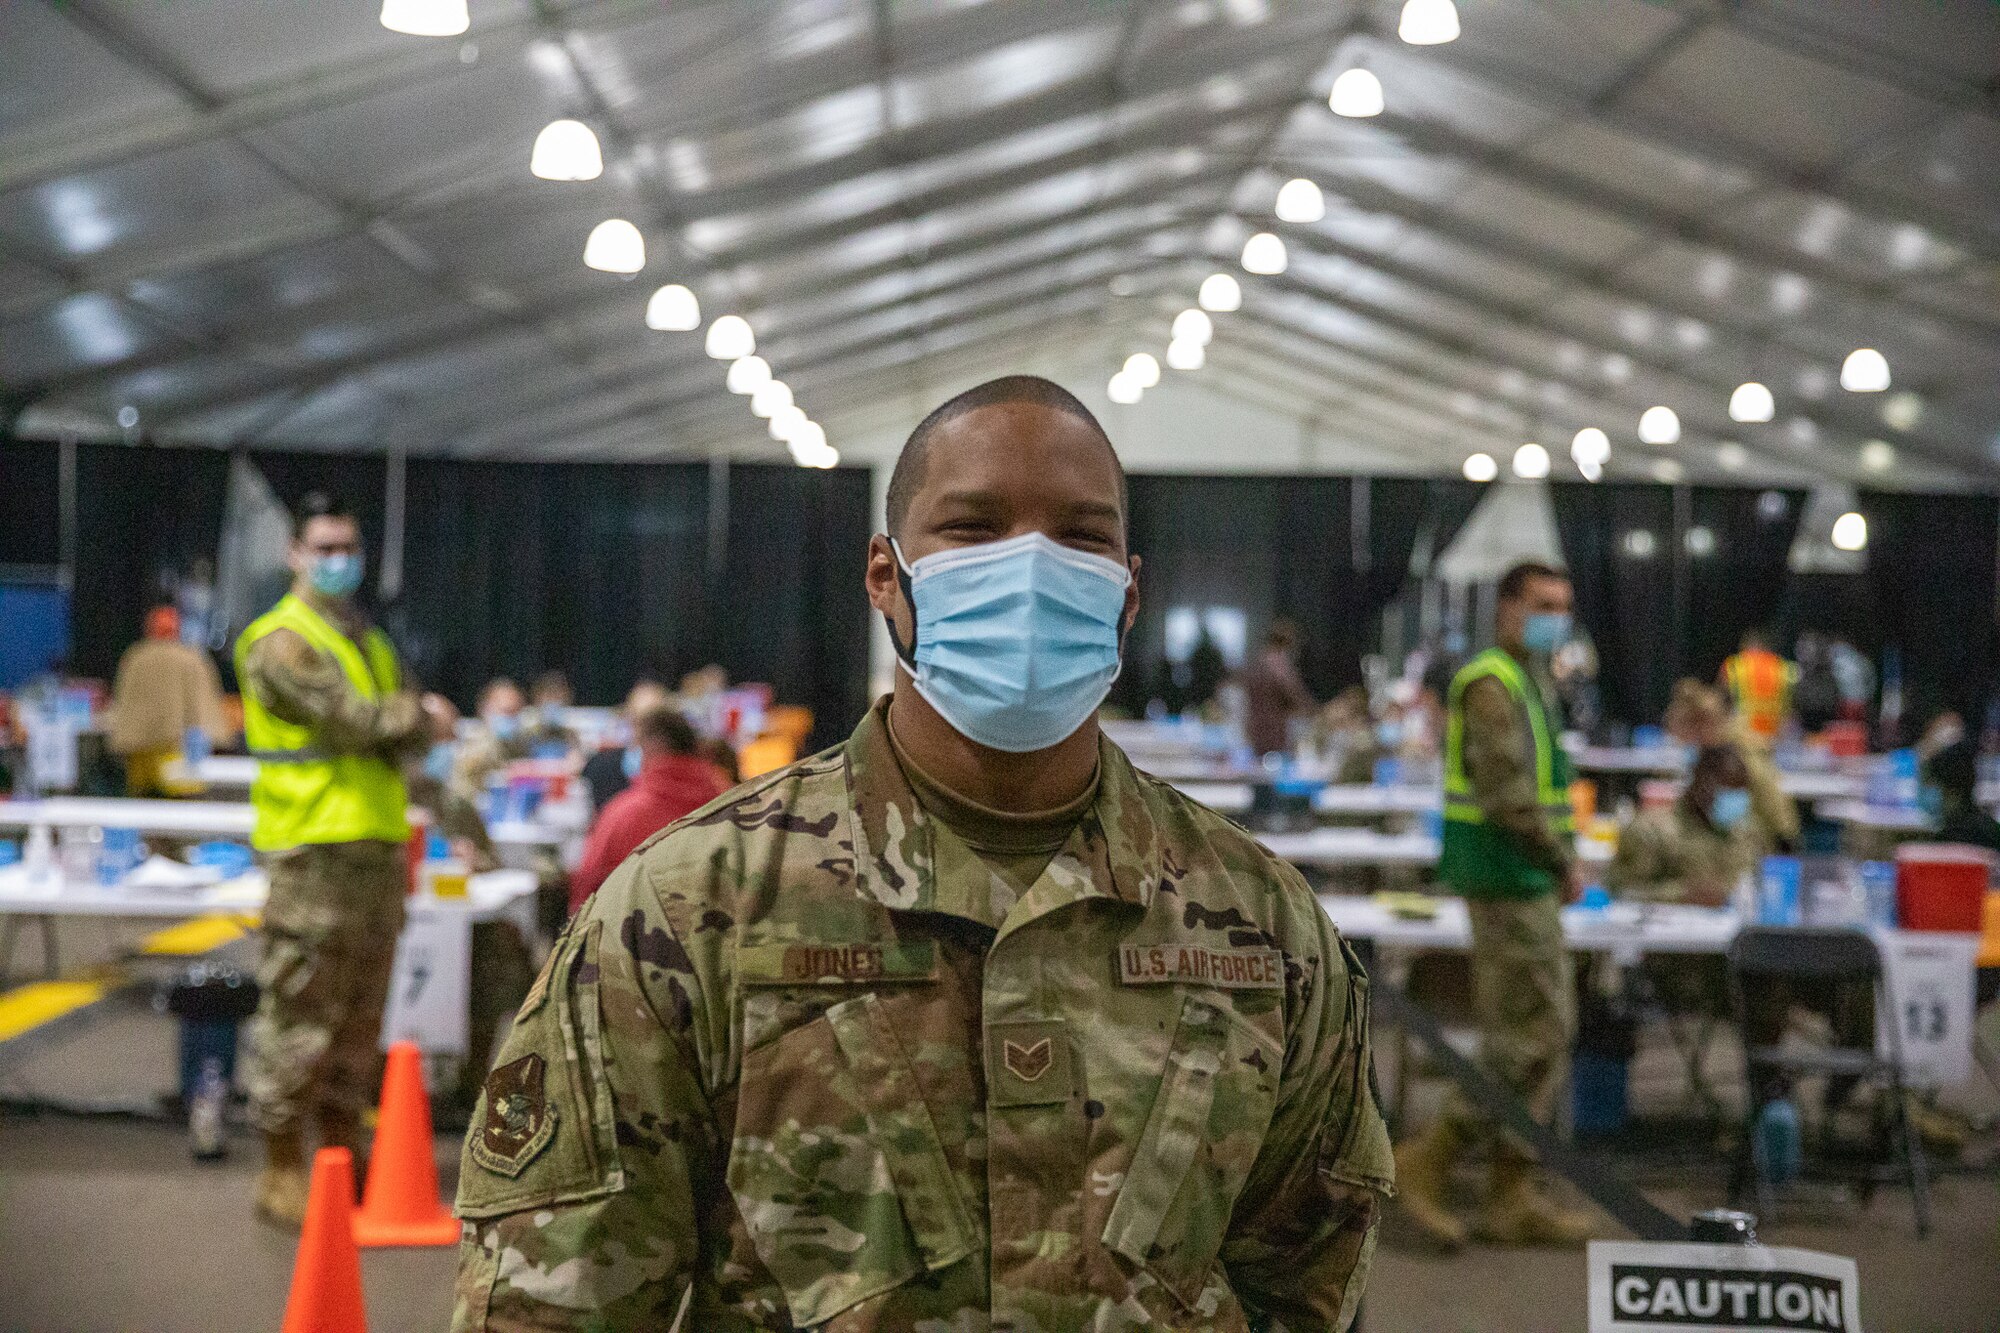 Staff Sgt. Deshaun Jones, 6th Force Support Squadron, Tampa, Fla., poses for a photo at the Minnesota State Fairgrounds Community Vaccination Center in St. Paul, Minn., April 26, 2021. The CVC is completely operational and is welcoming the St. Paul community to receive free COVID-19 vaccines. U.S. Northern Command, through U.S. Army North, remains committed to providing continued, flexible Department of Defense support to the Federal Emergency Management Agency as part of the whole-of-government response to COVID-19.